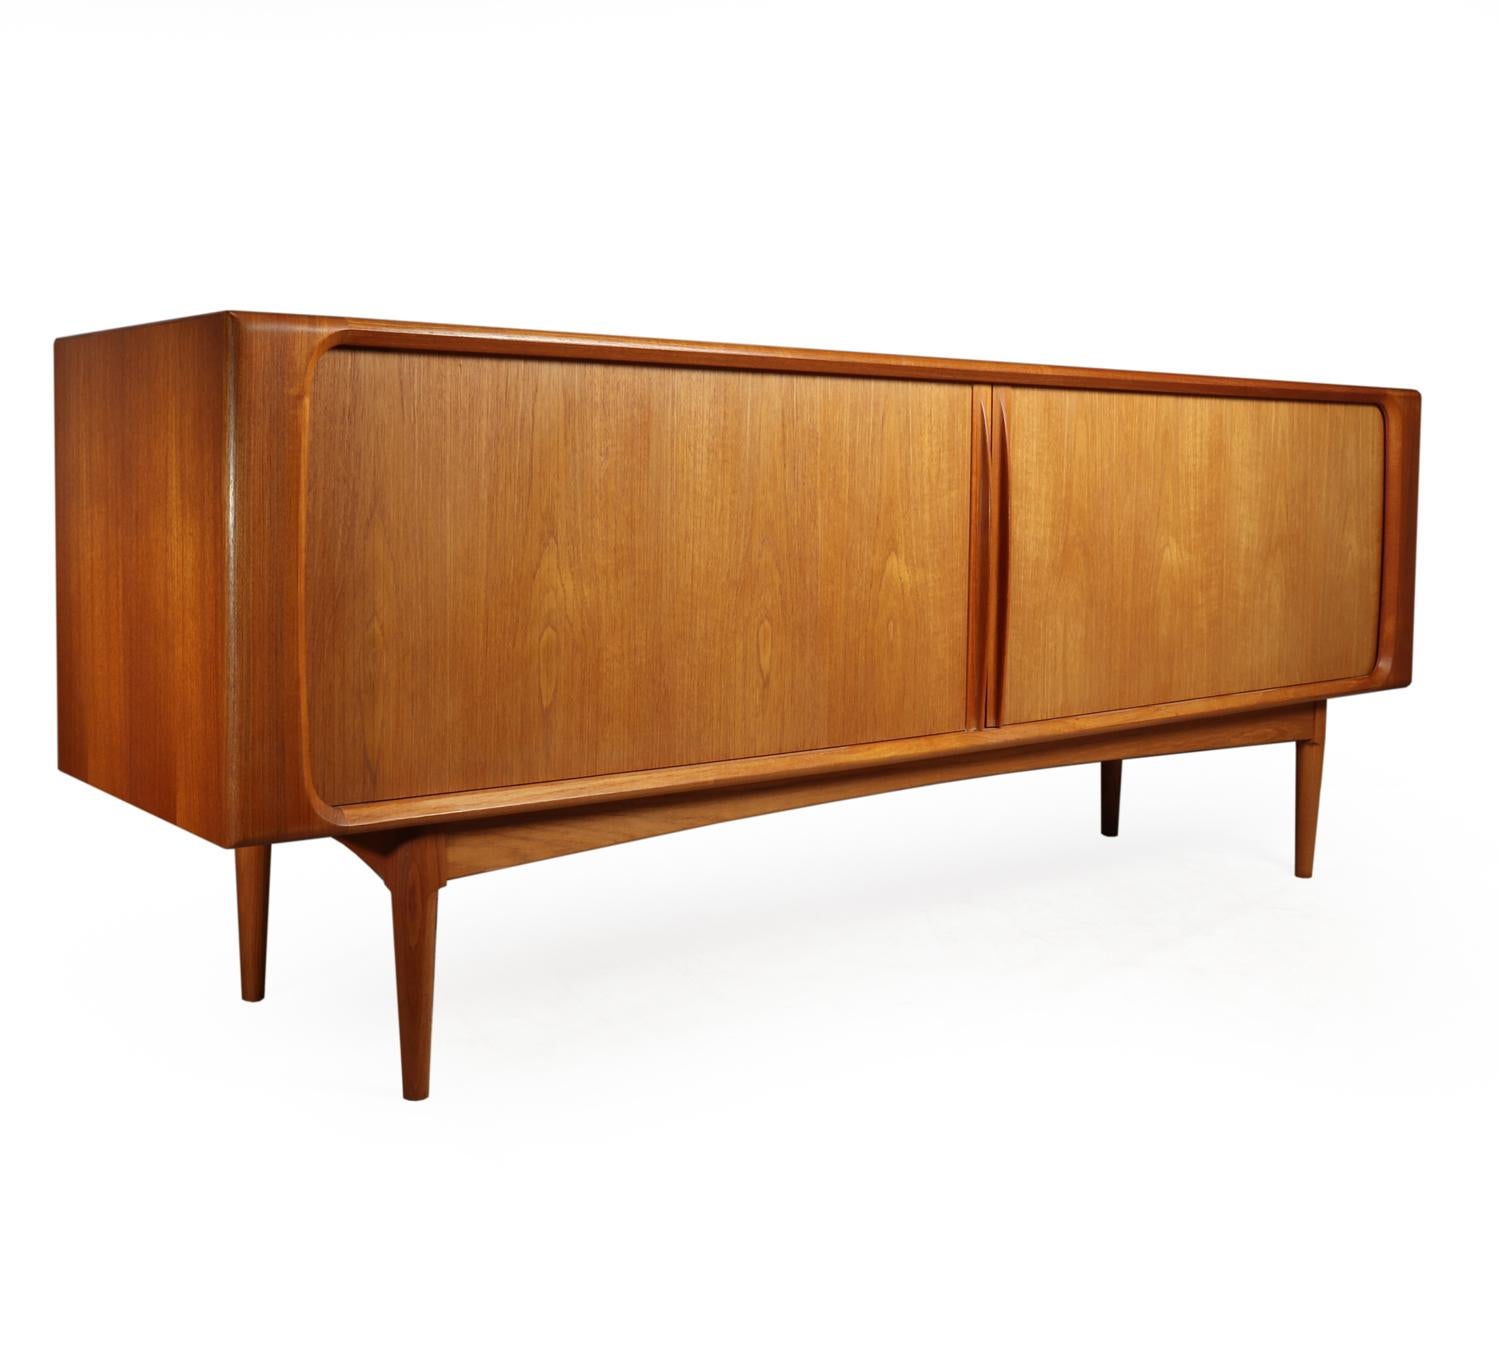 Midcentury teak sideboard By Bernhard Pederson, circa 1960
This Original, 1960s midcentury sideboard is by Bernhard Pederson for BPS furniture. It is Teak with tambour sliding doors, adjustable shelves and drawers and has solid construction and